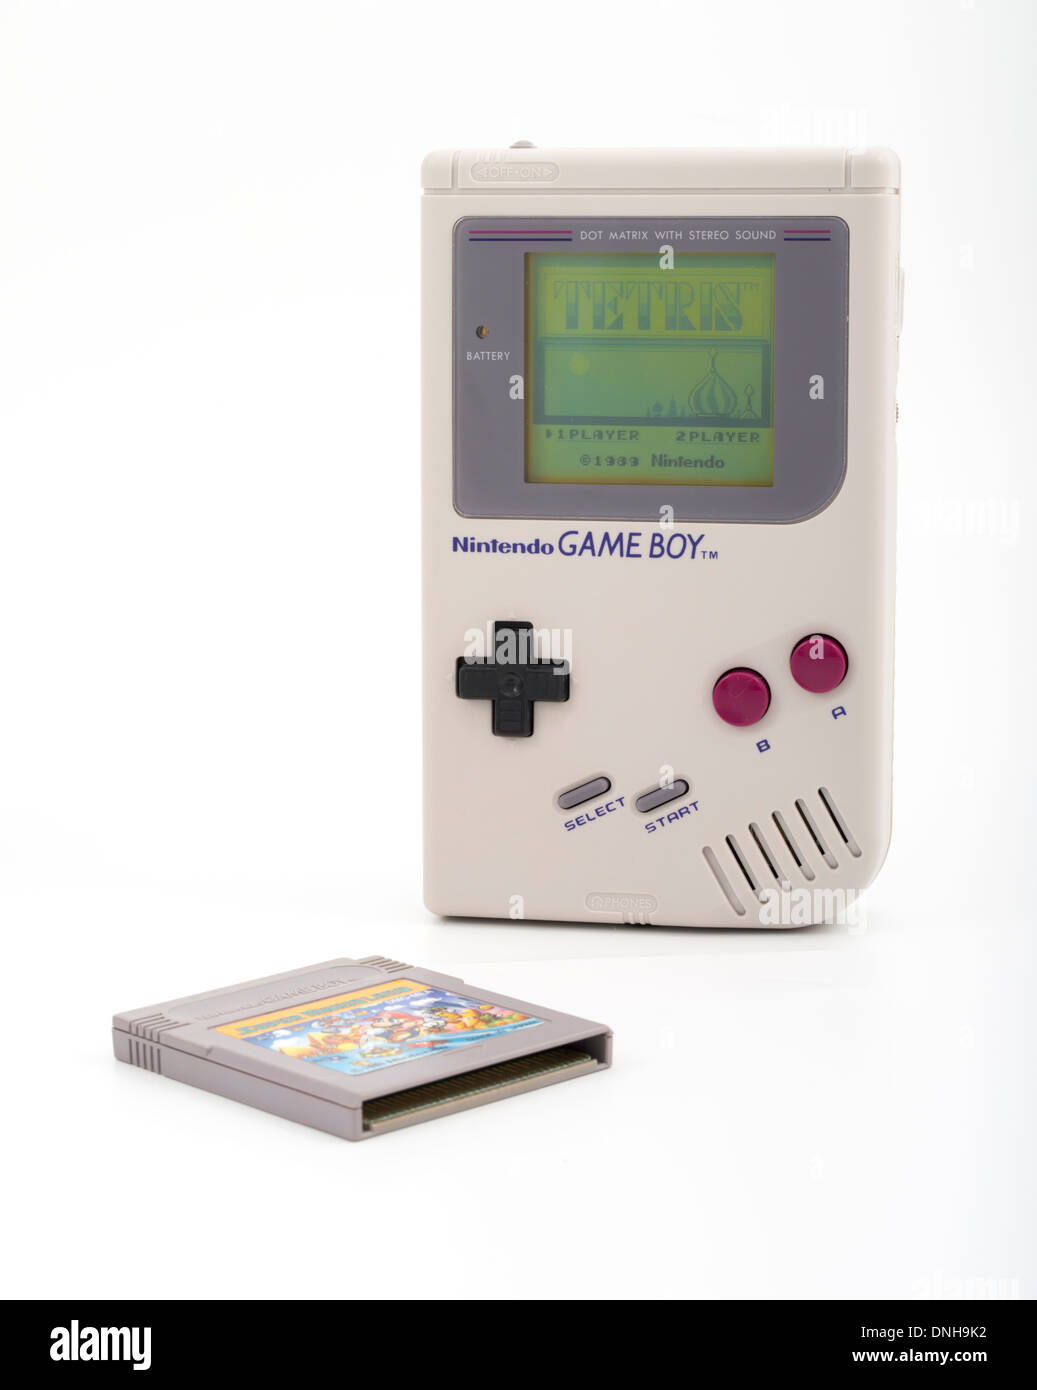 Nintendo Gameboy with mario cartridge and showing TETRIS game on screen.  Original DMG-001 version in grey / gray from Japan Stock Photo - Alamy